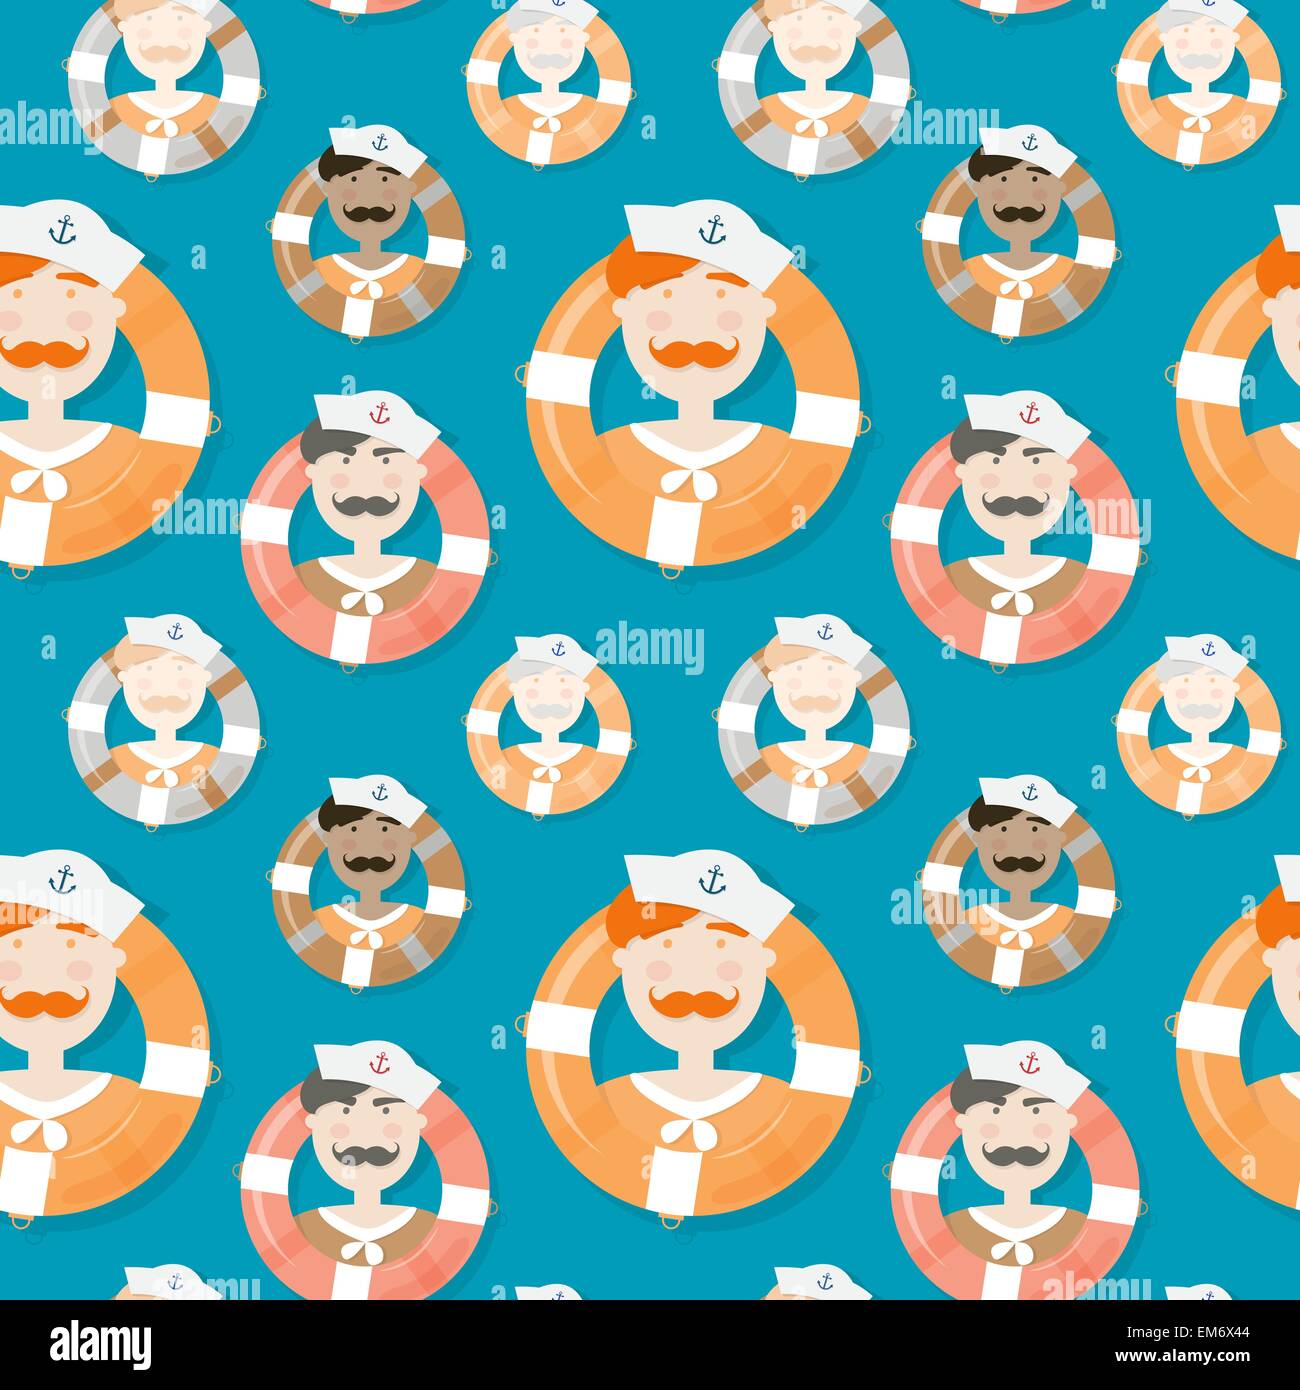 Sailors of different ethnicities seamless vector pattern in cartooning style Stock Vector